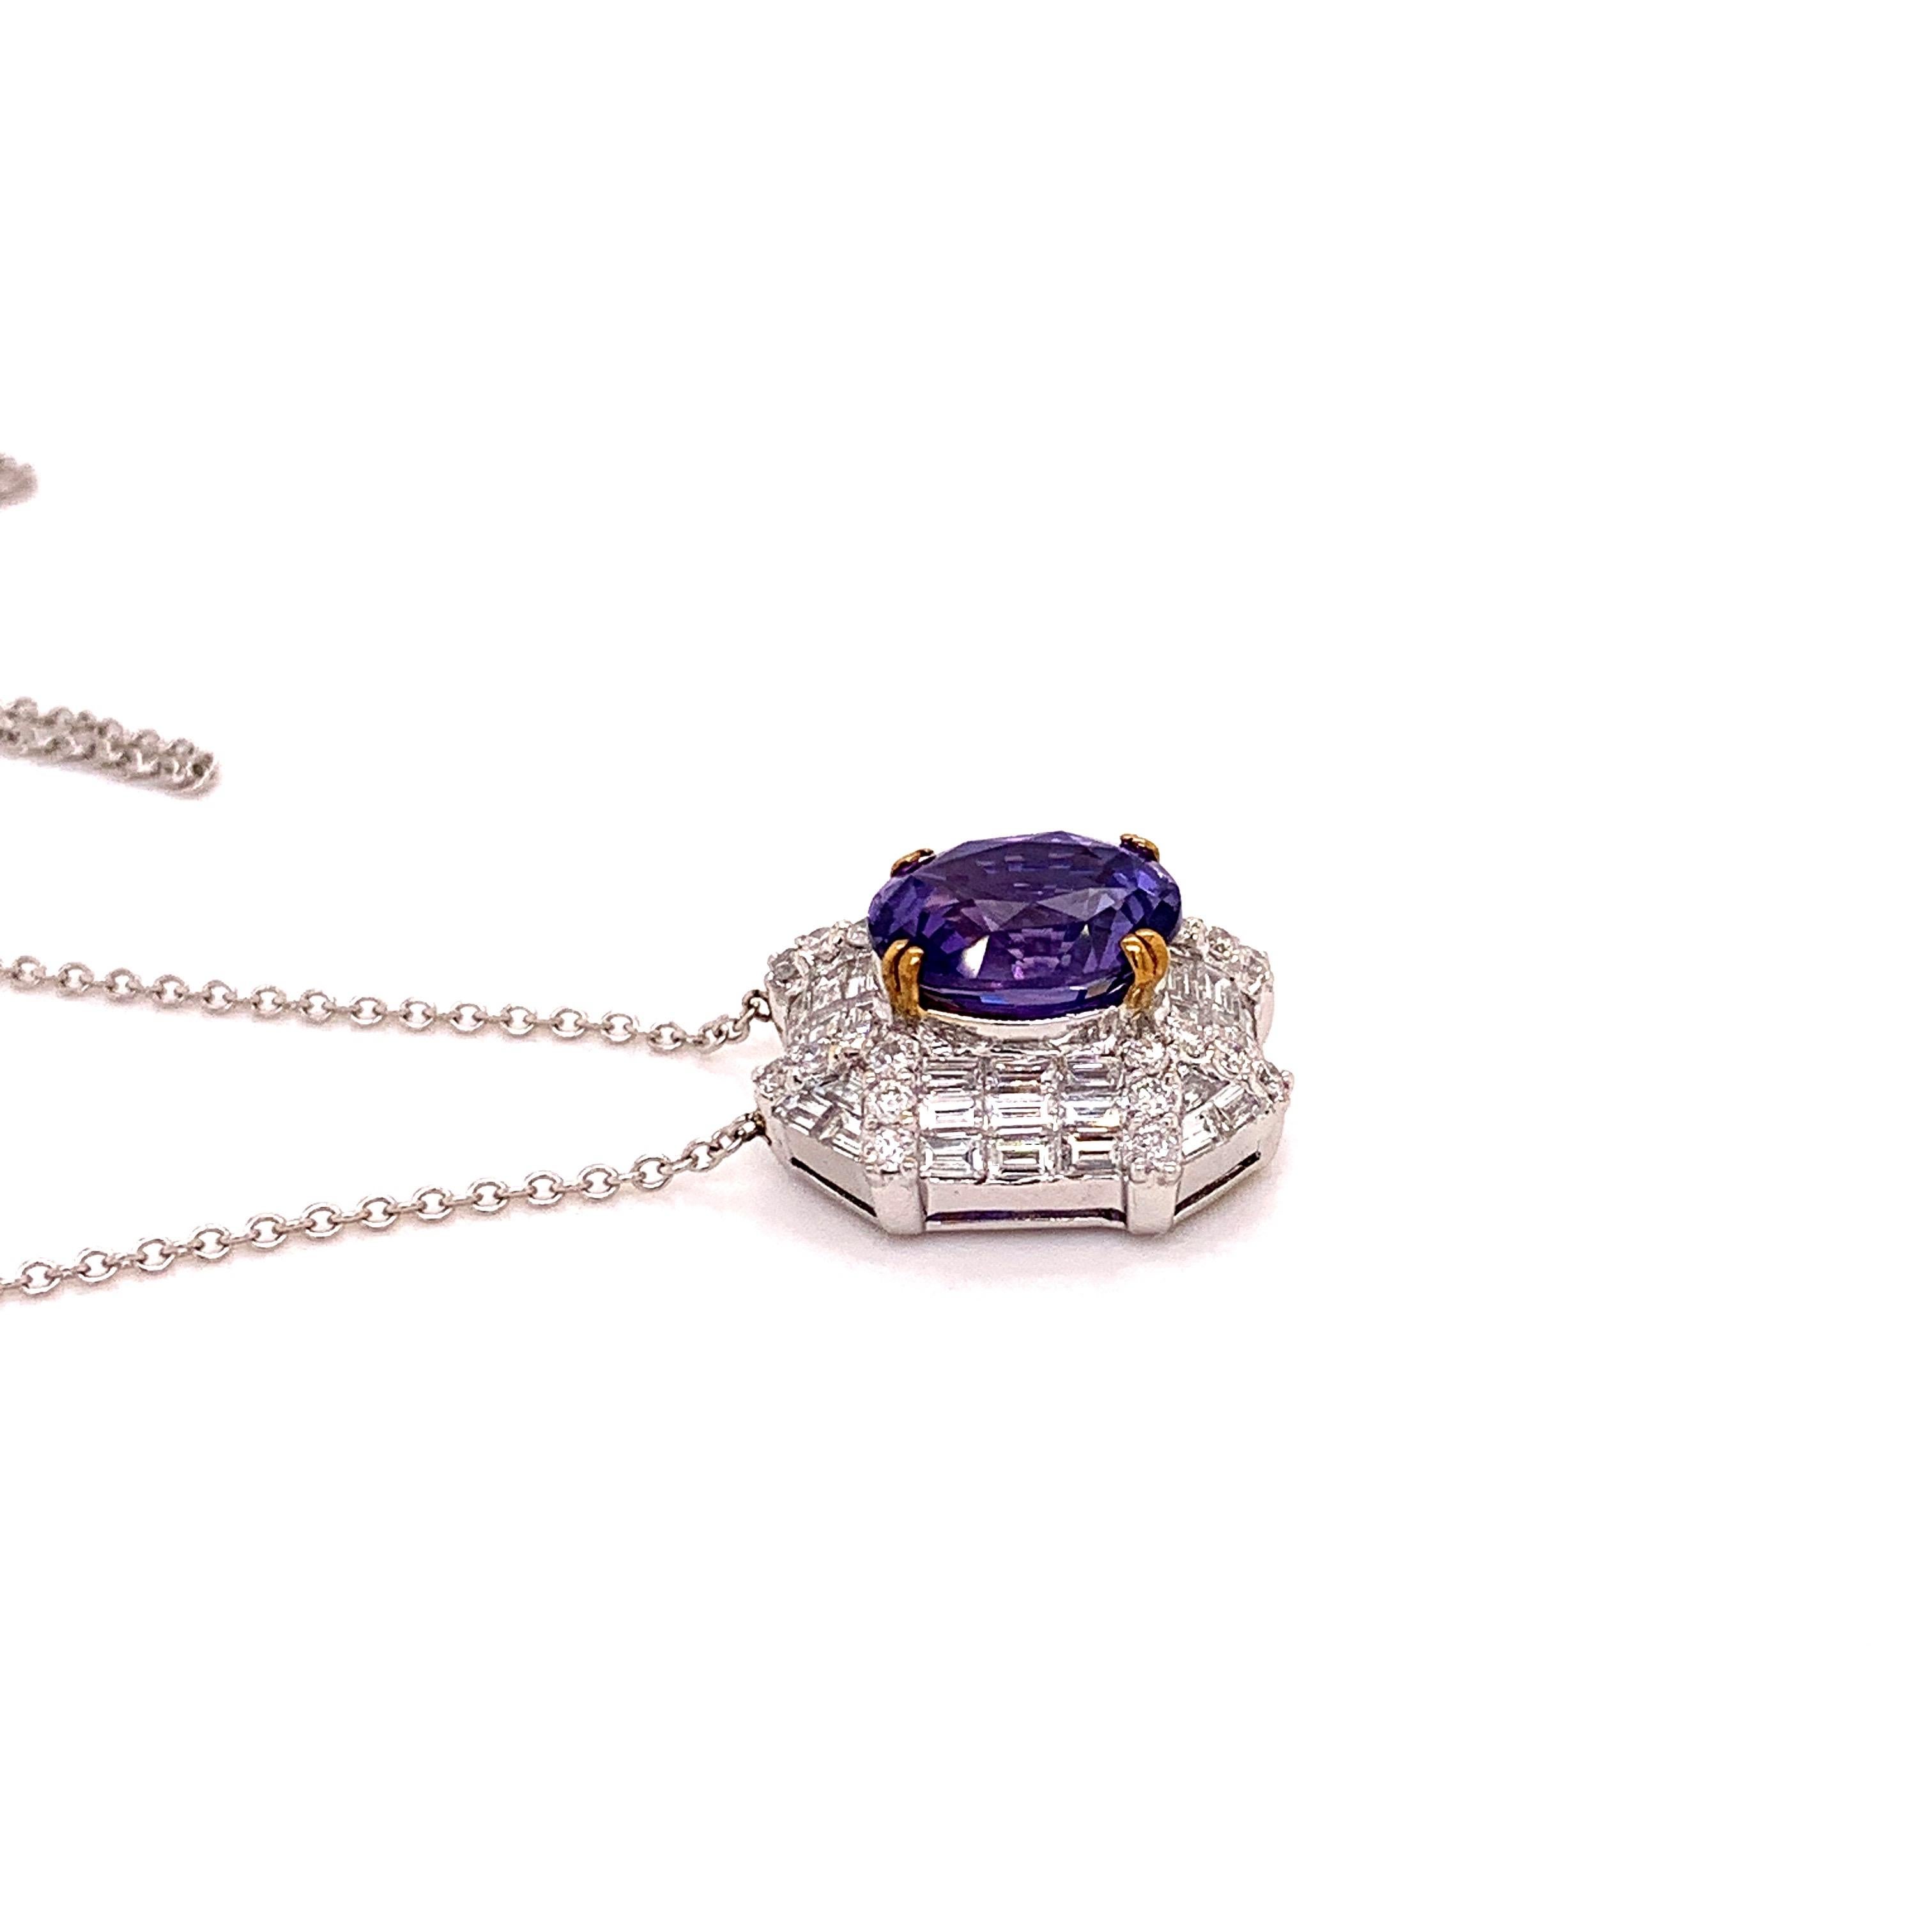 Rare unheated sapphire pendant. High lustre, rare unheated, Sri Lanka origin, oval faceted, 3.83 carats colour-changing violet-purple sapphire mounted in high profile with eight prongs, accented with sparkling baguette diamonds, round brilliant cut